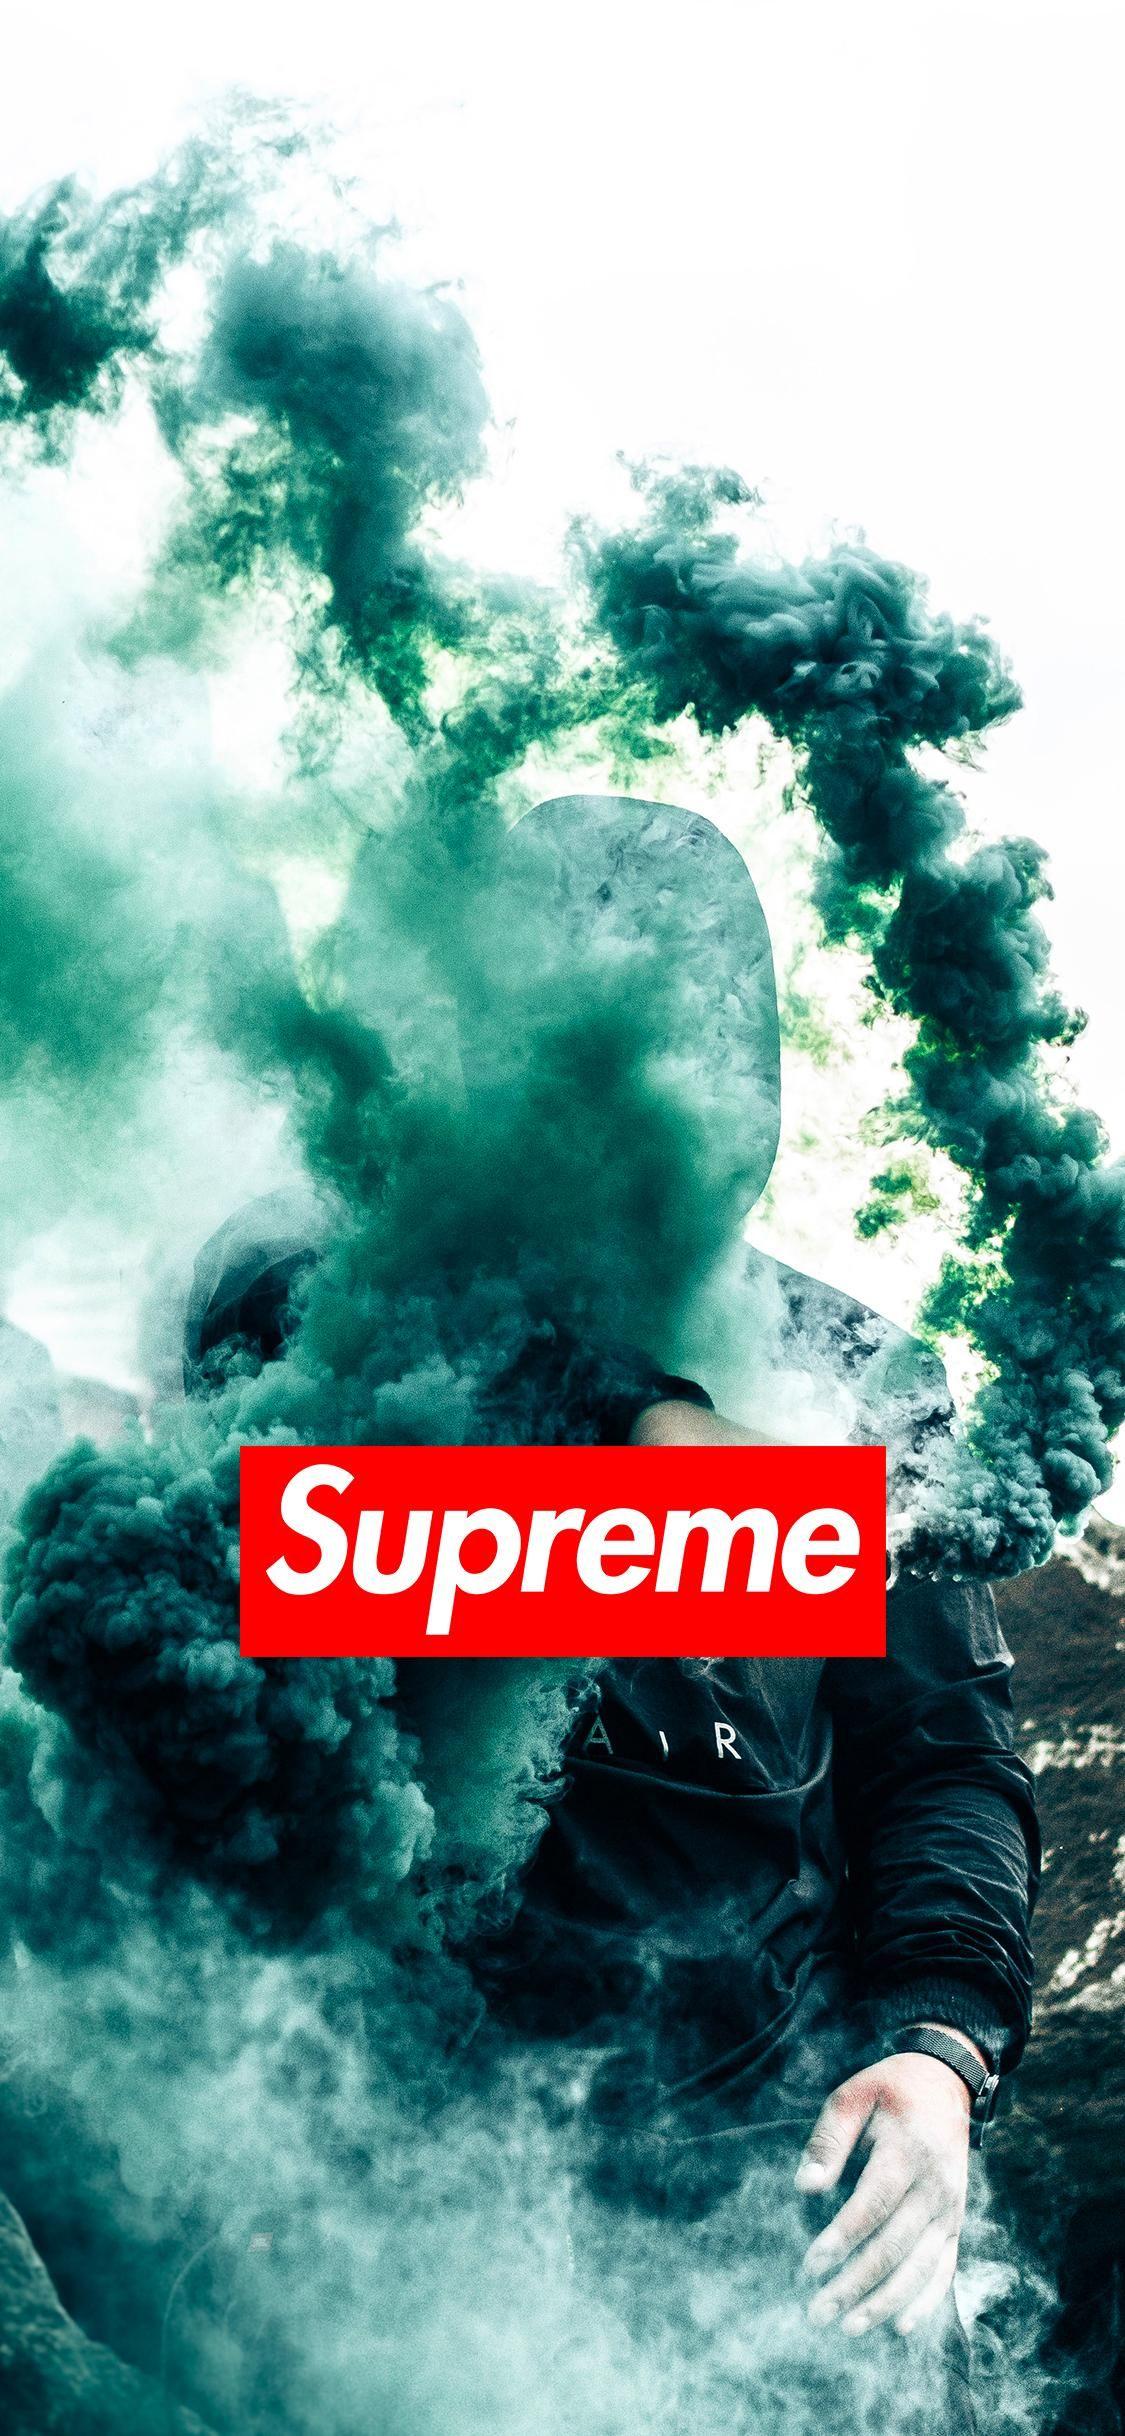 Supreme Wallpaper For iPhone & Android. iPhone Wallpaper 8